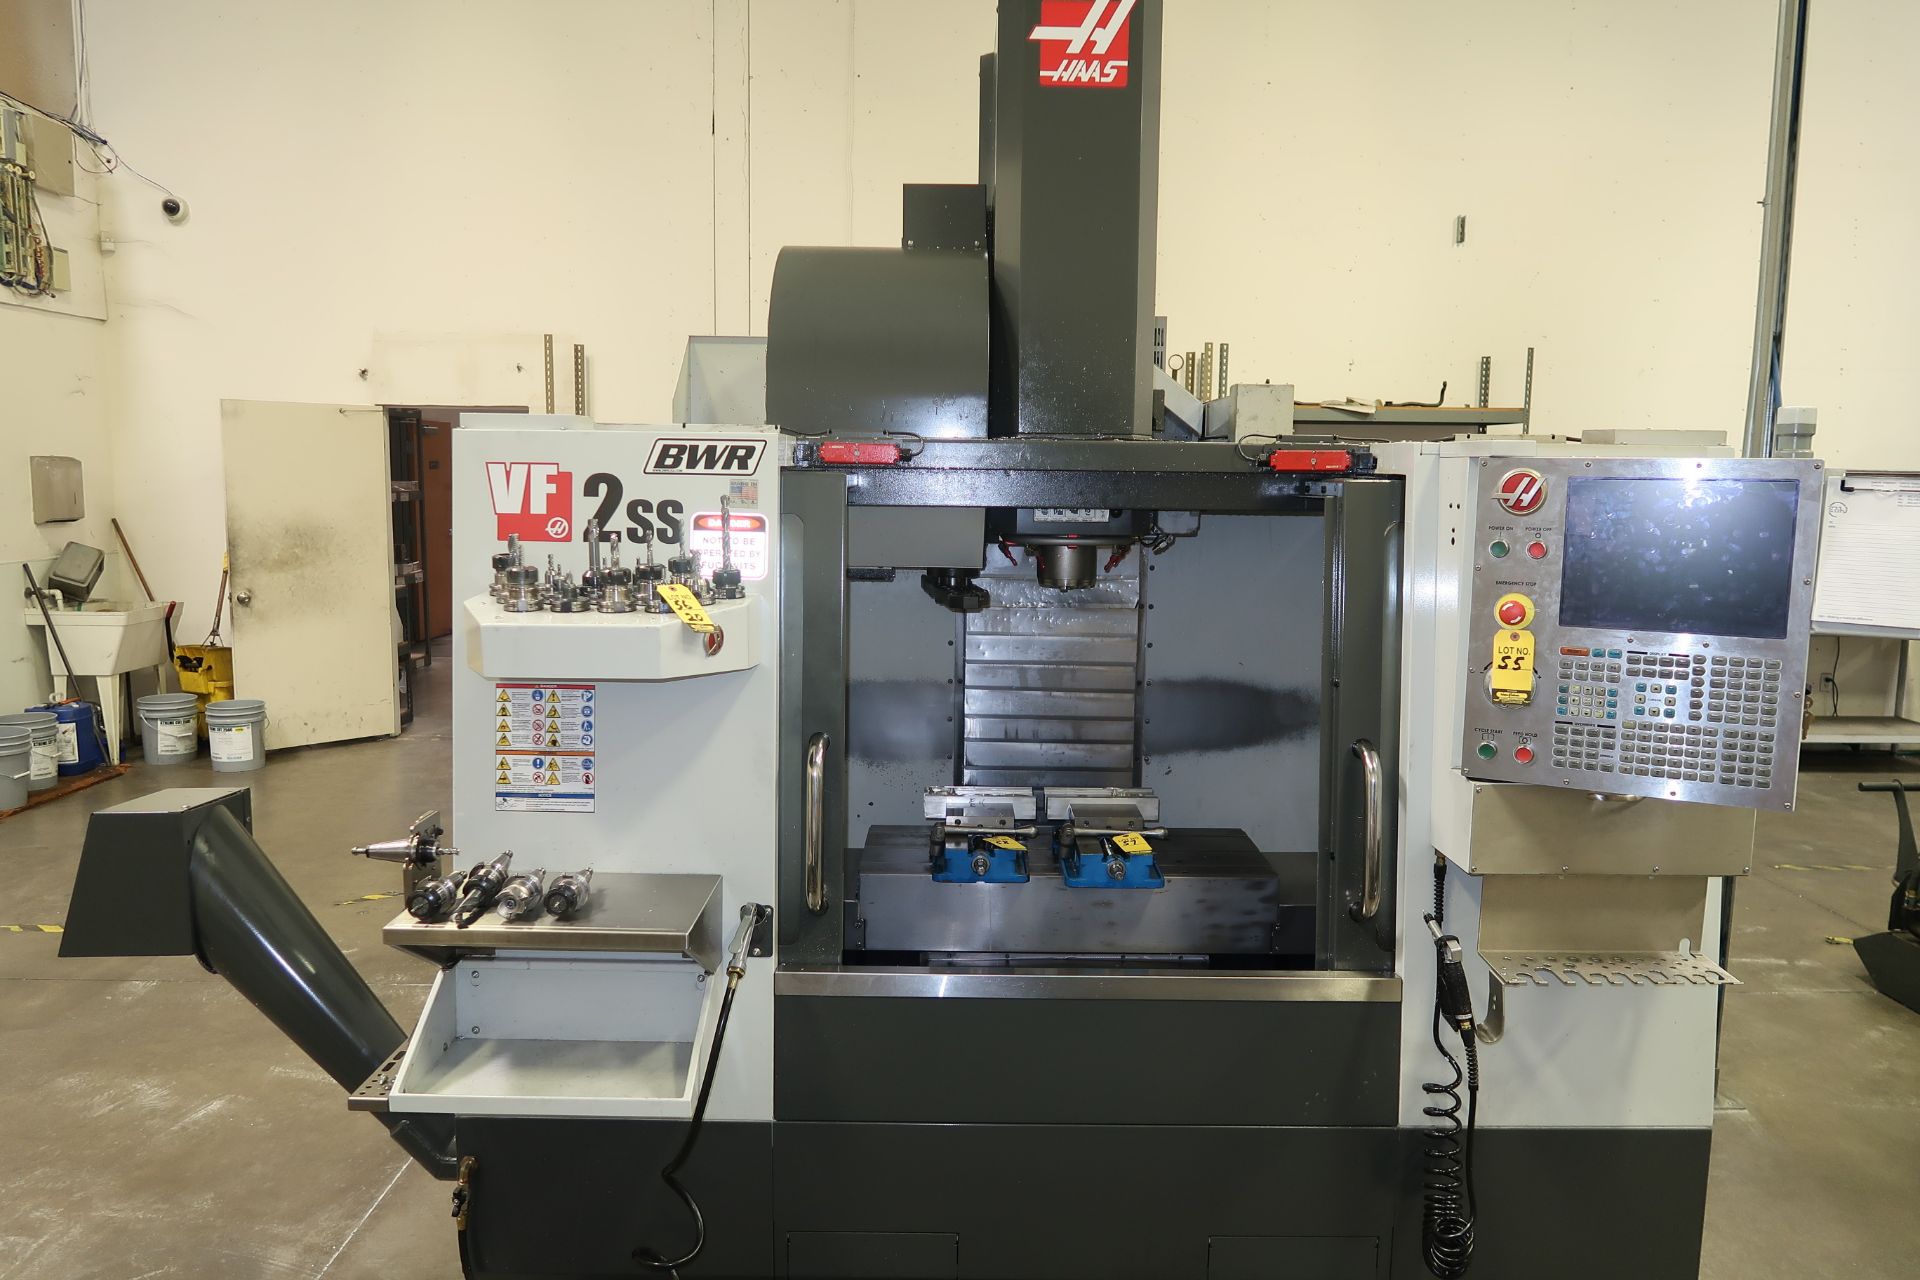 2014 HAAS VF-2SS CNC VERTICAL MACHINING CENTER, CHIP AUGER, PROGRAMMABLE COOLANT, 24 TOOL ATC, SN.